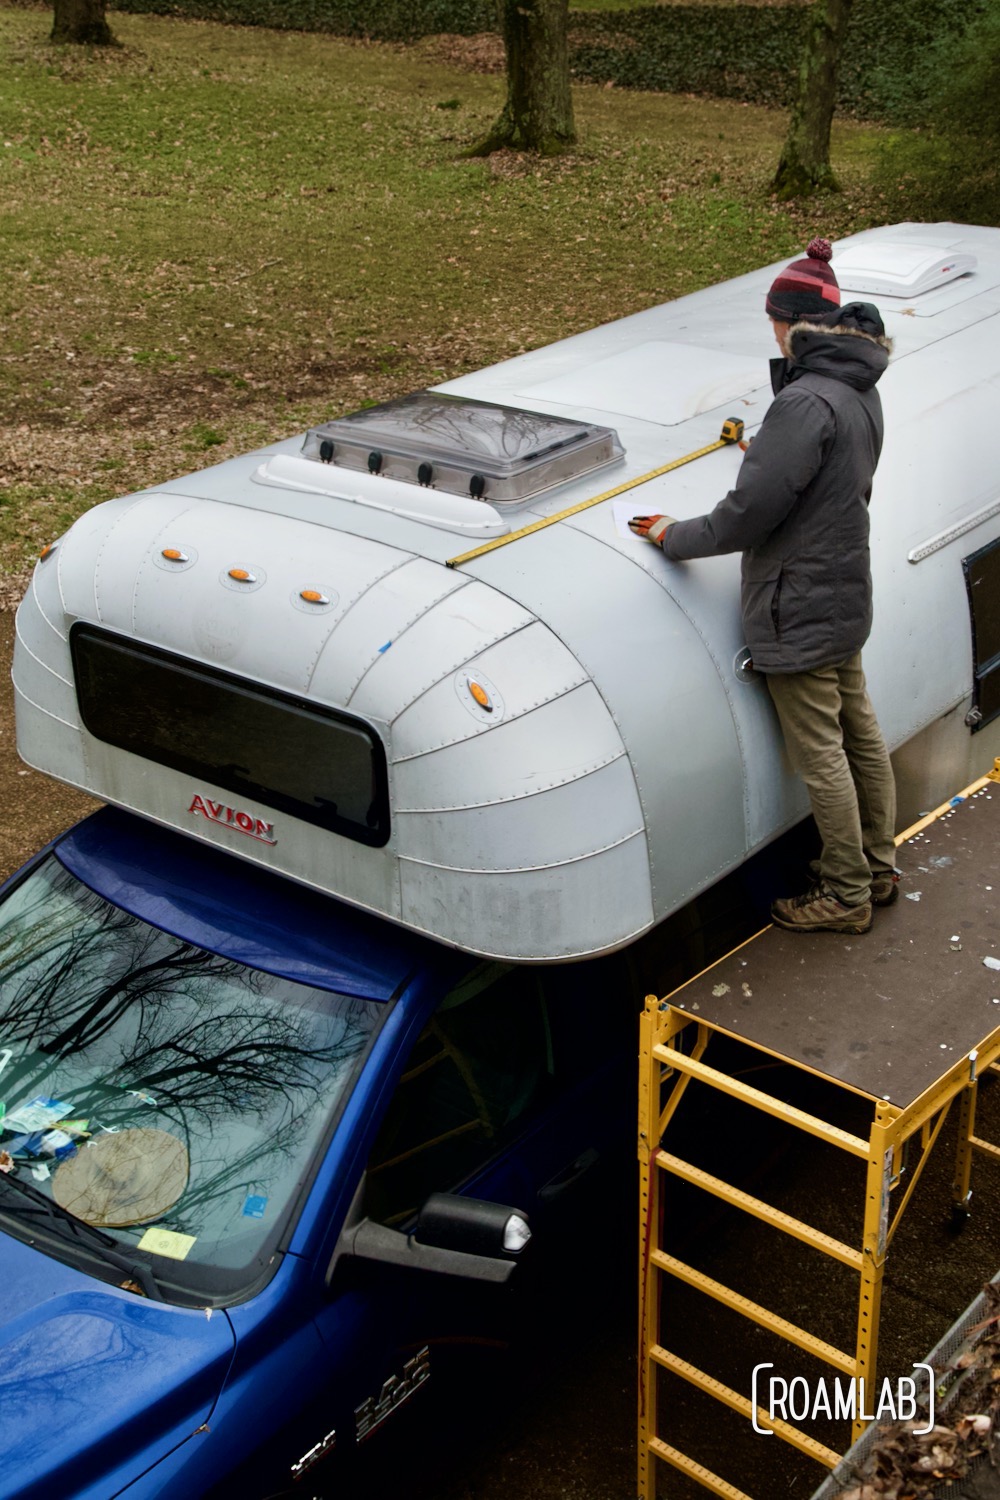 Calculating the solar capacity of an Avion C11 truck camper roof